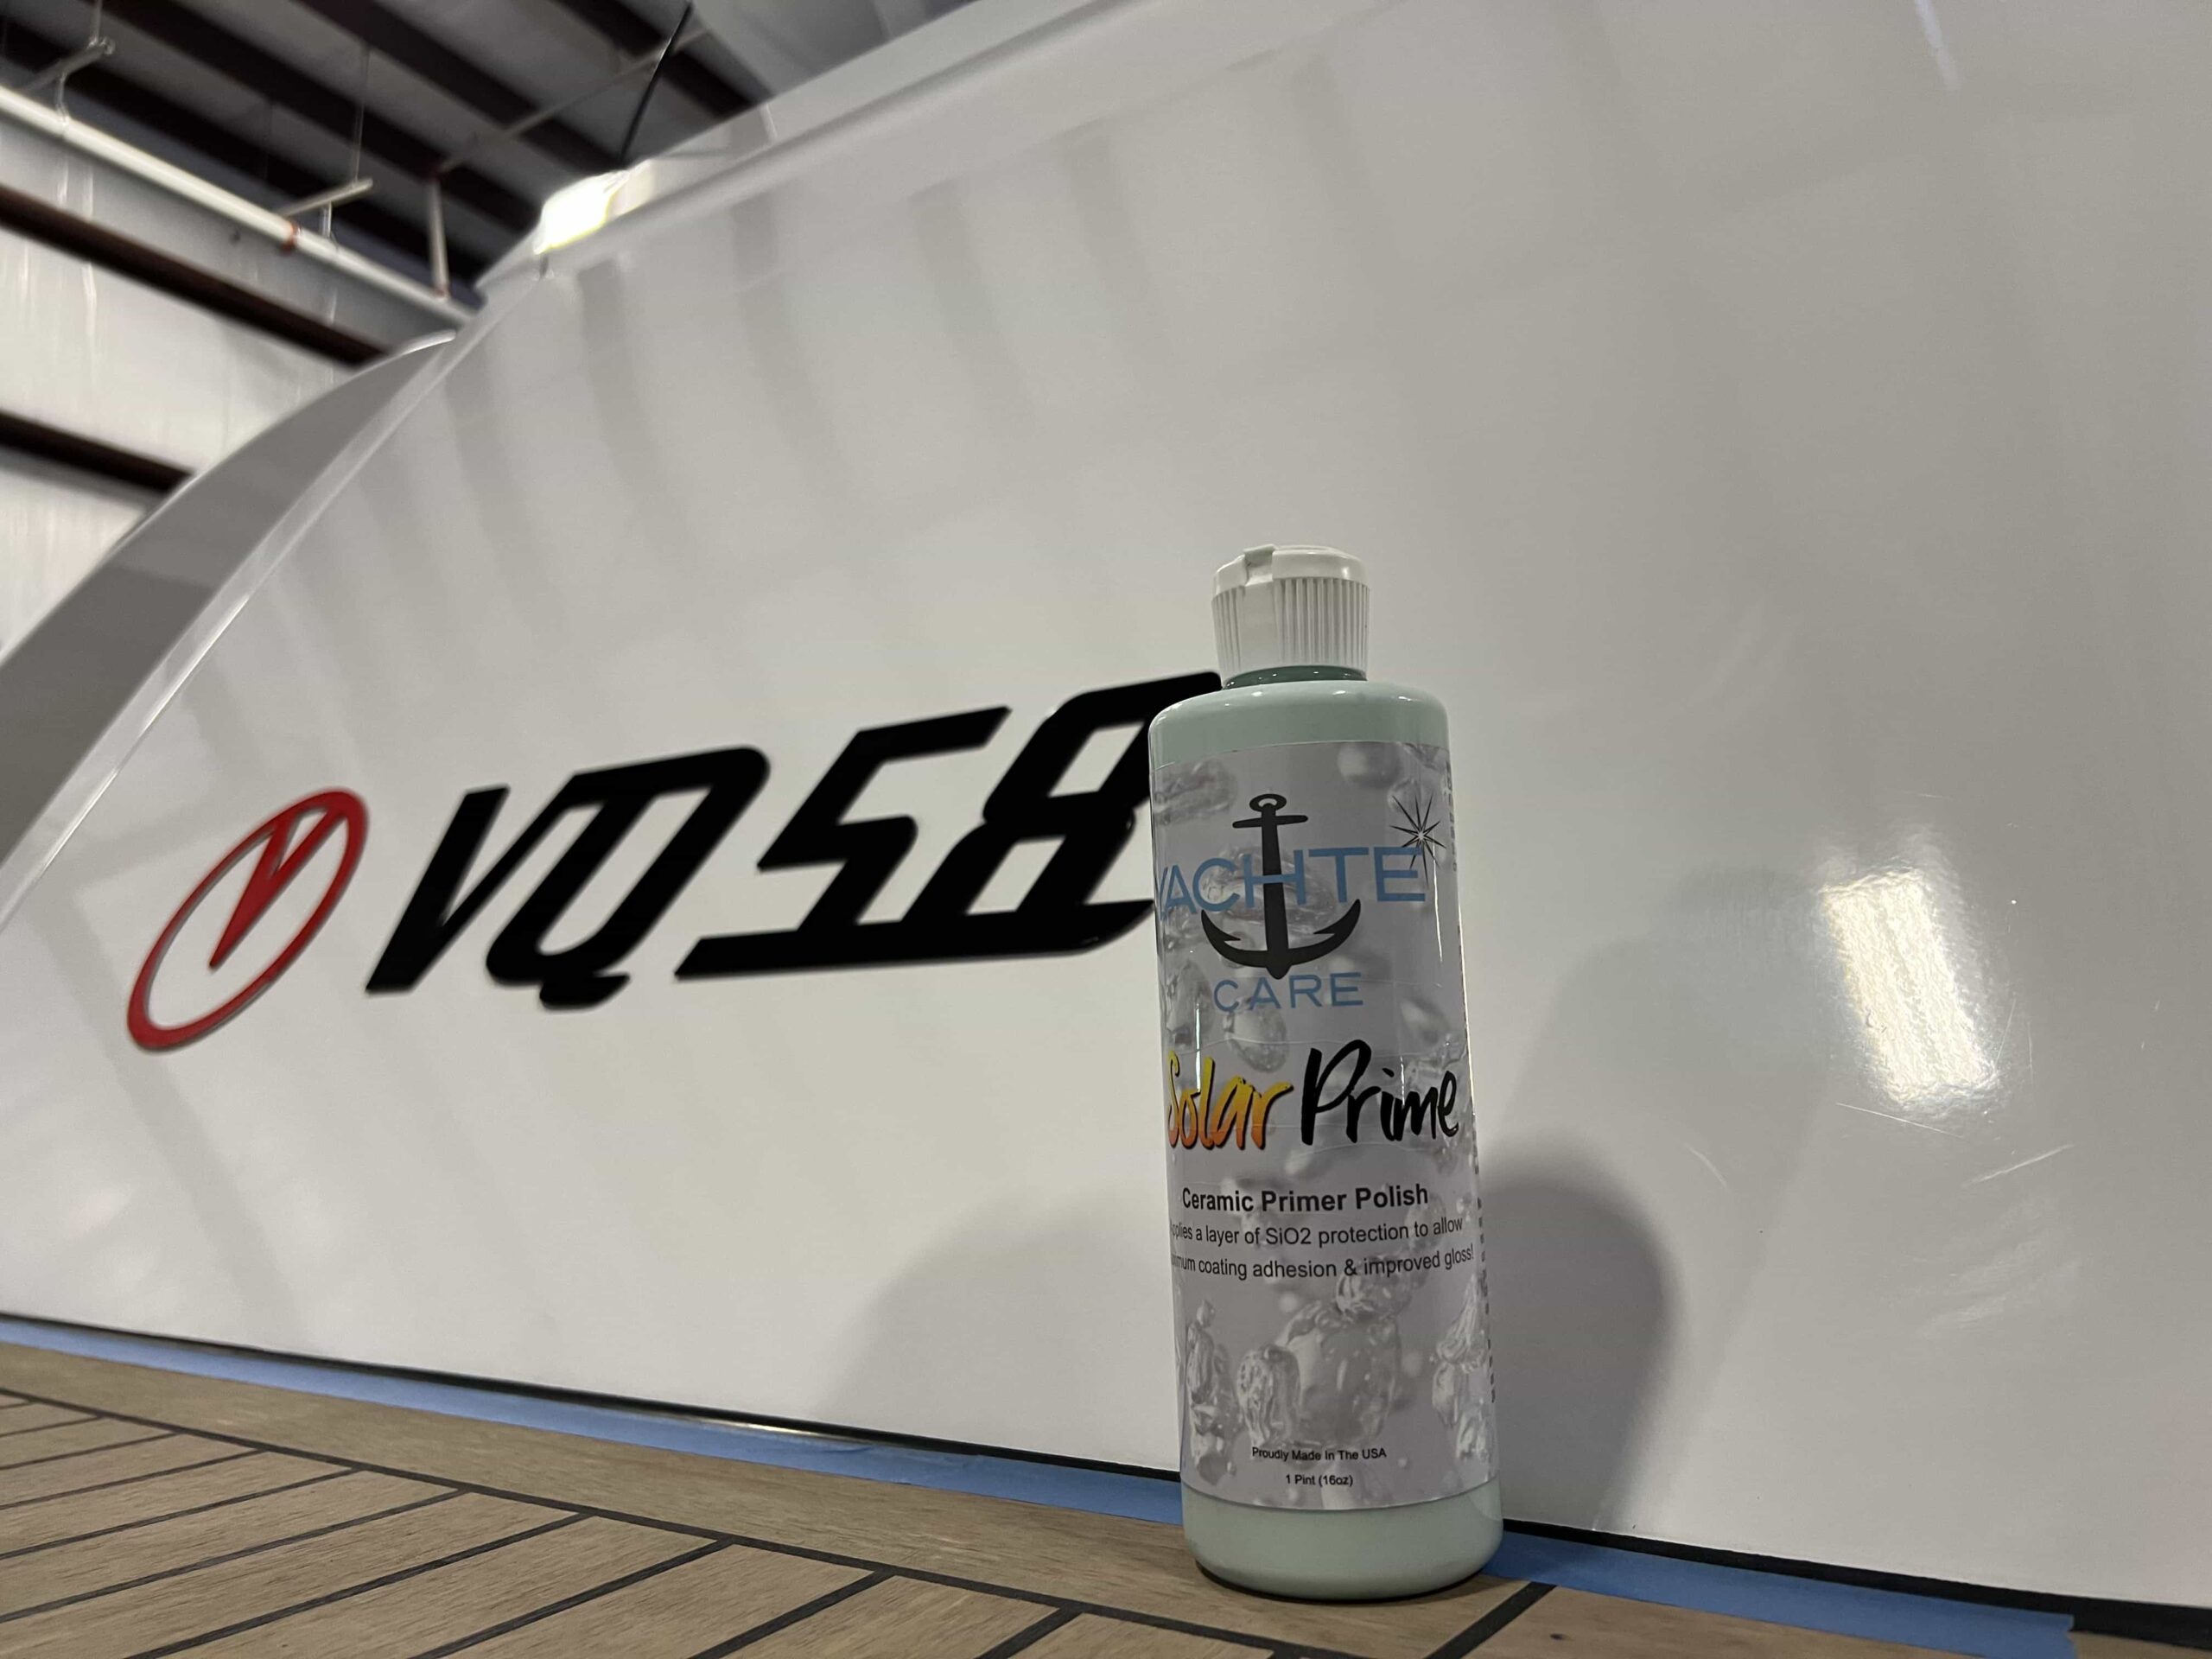 Ehance the gloss of your boat with a primer polish